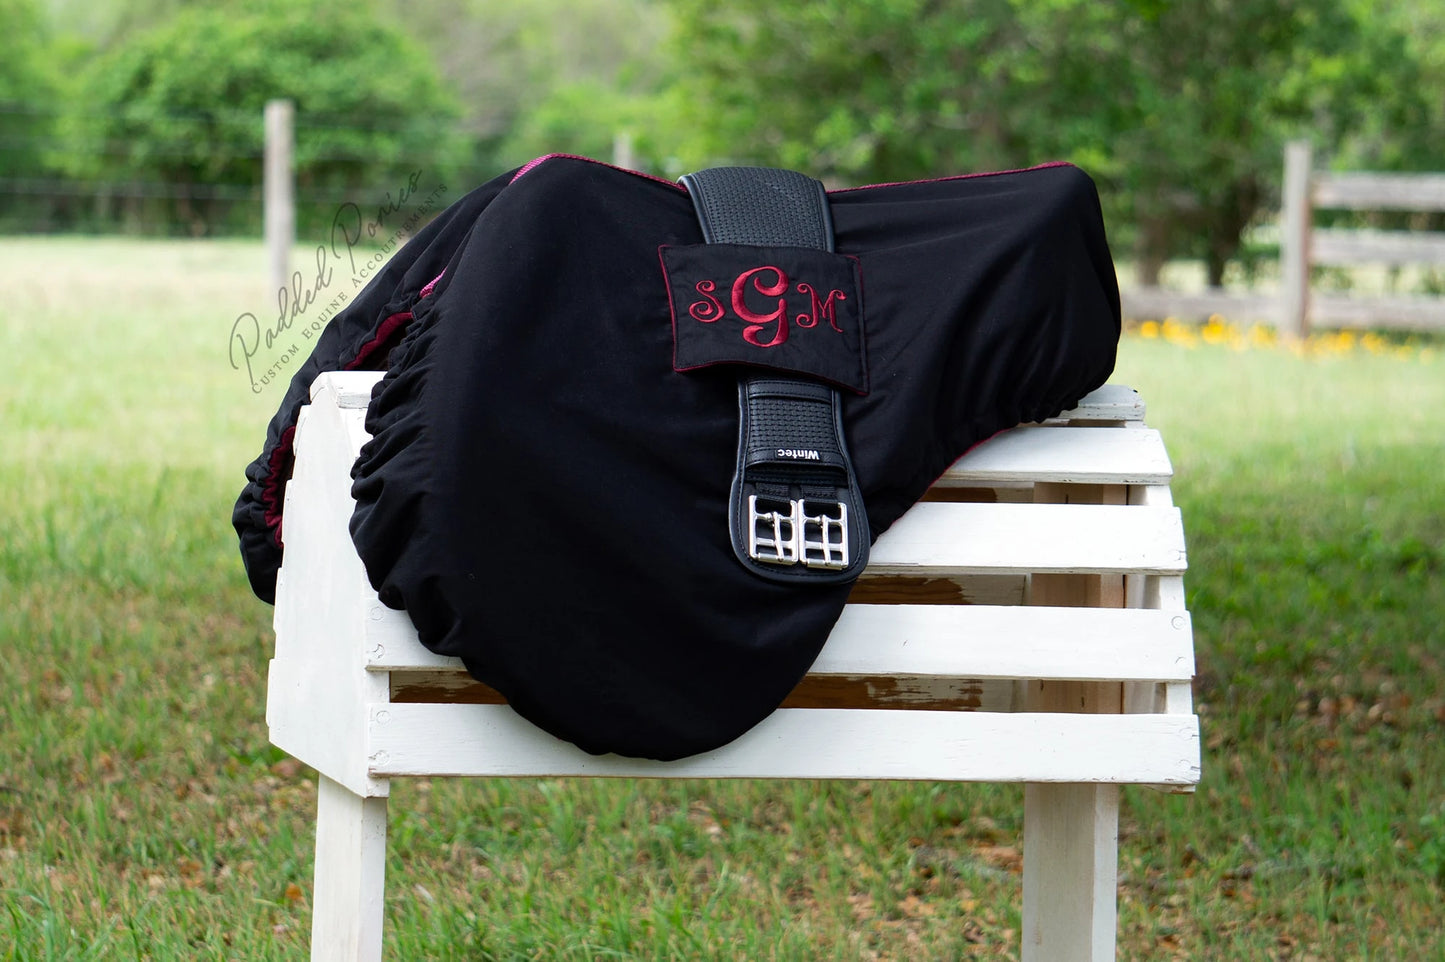 Black and Burgundy Monogrammed Solid Color All Purpose Saddle Cover with Girth Holder Pocket